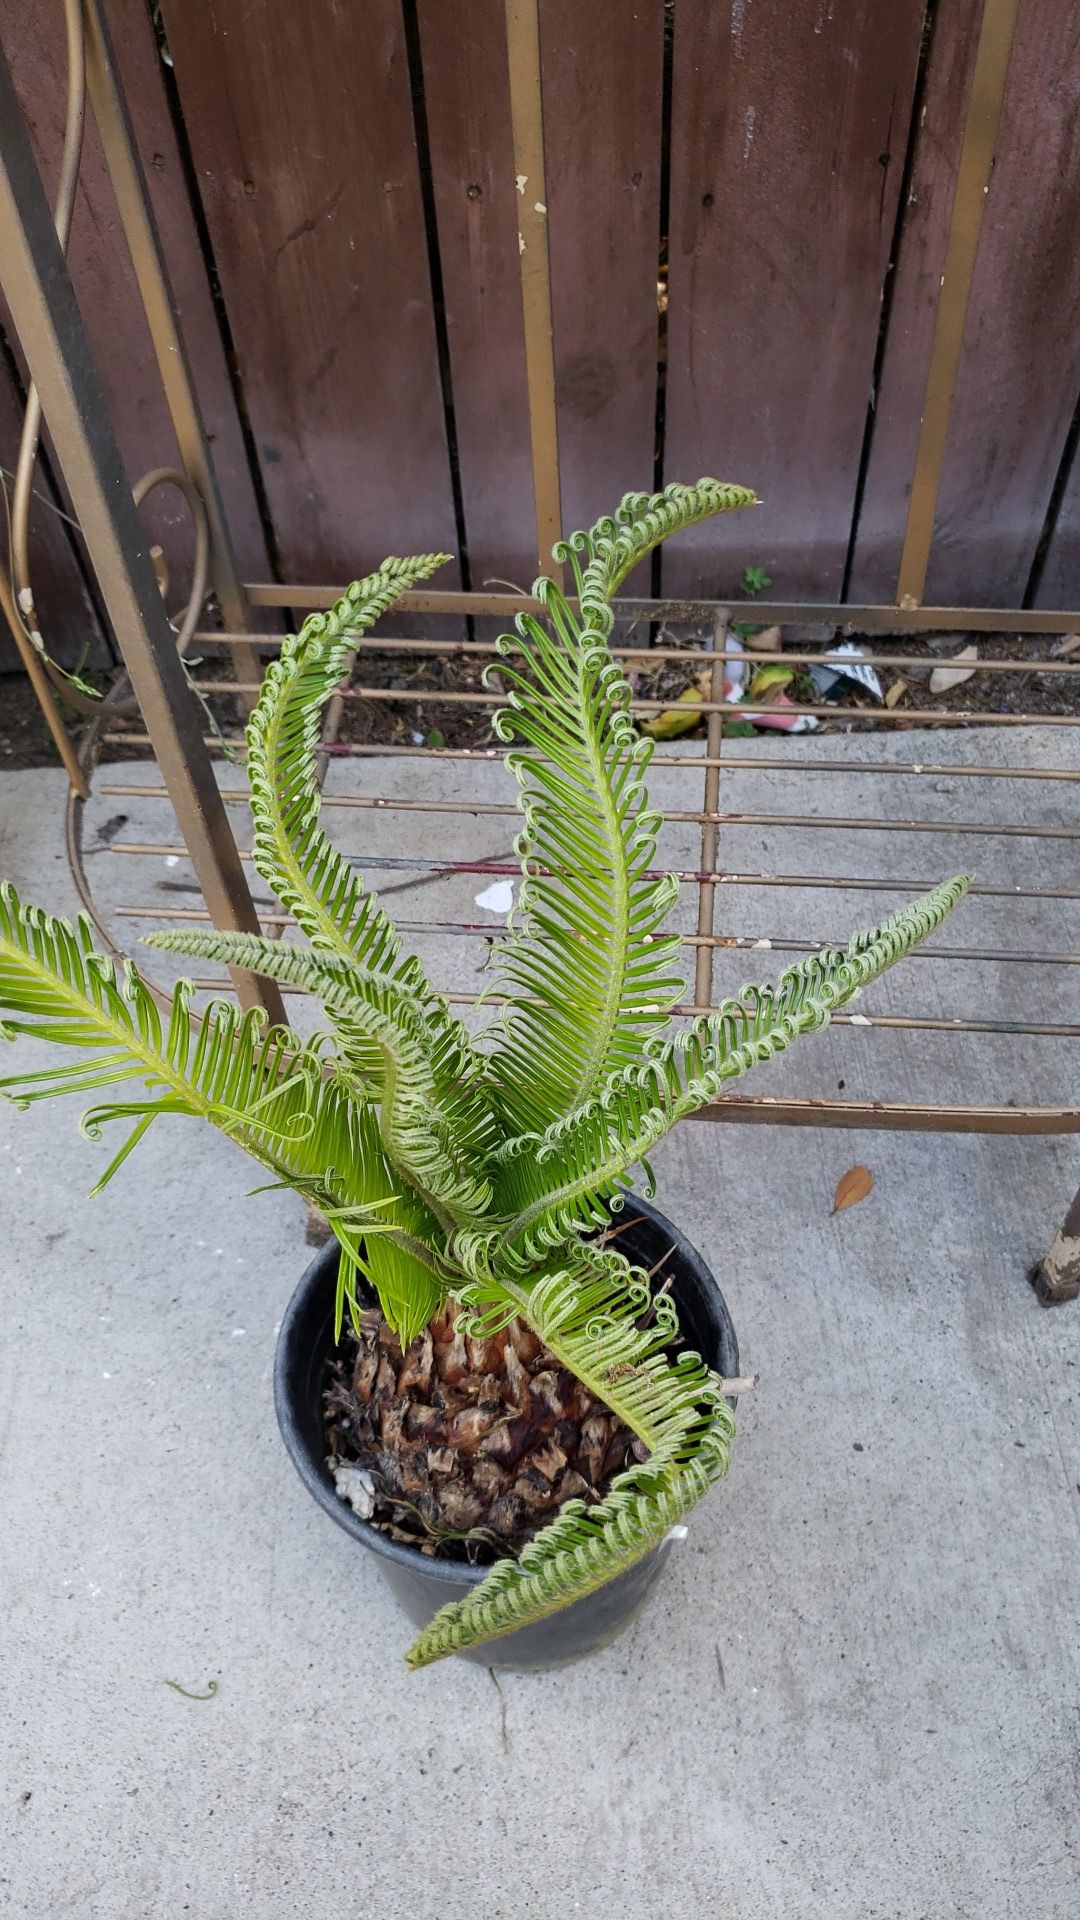 %%% Sago plant about 2 " tall only $10.00 0r best offer ****